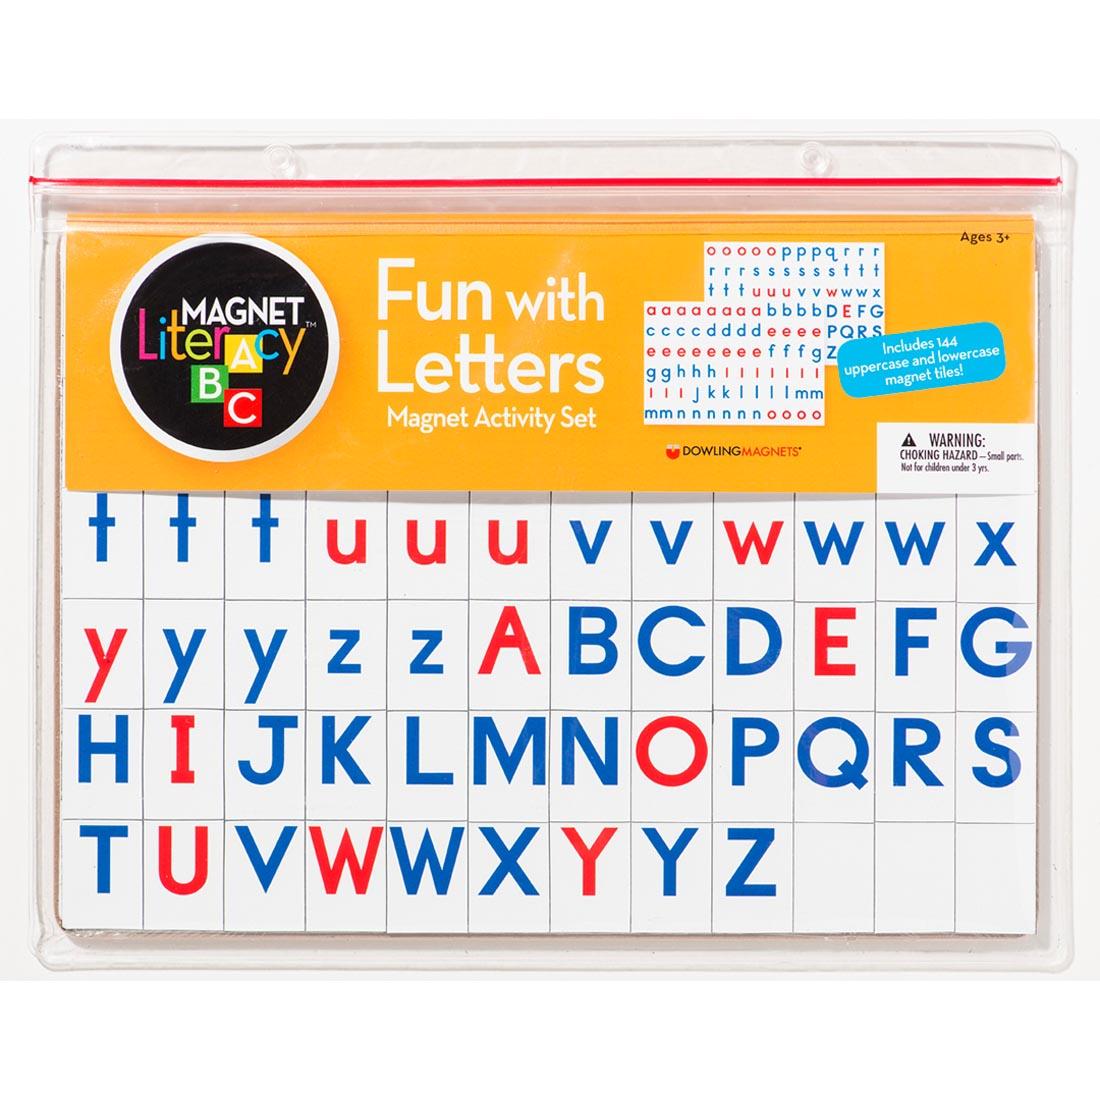 Magnet Literacy: Fun With Letters Magnet Activity Set